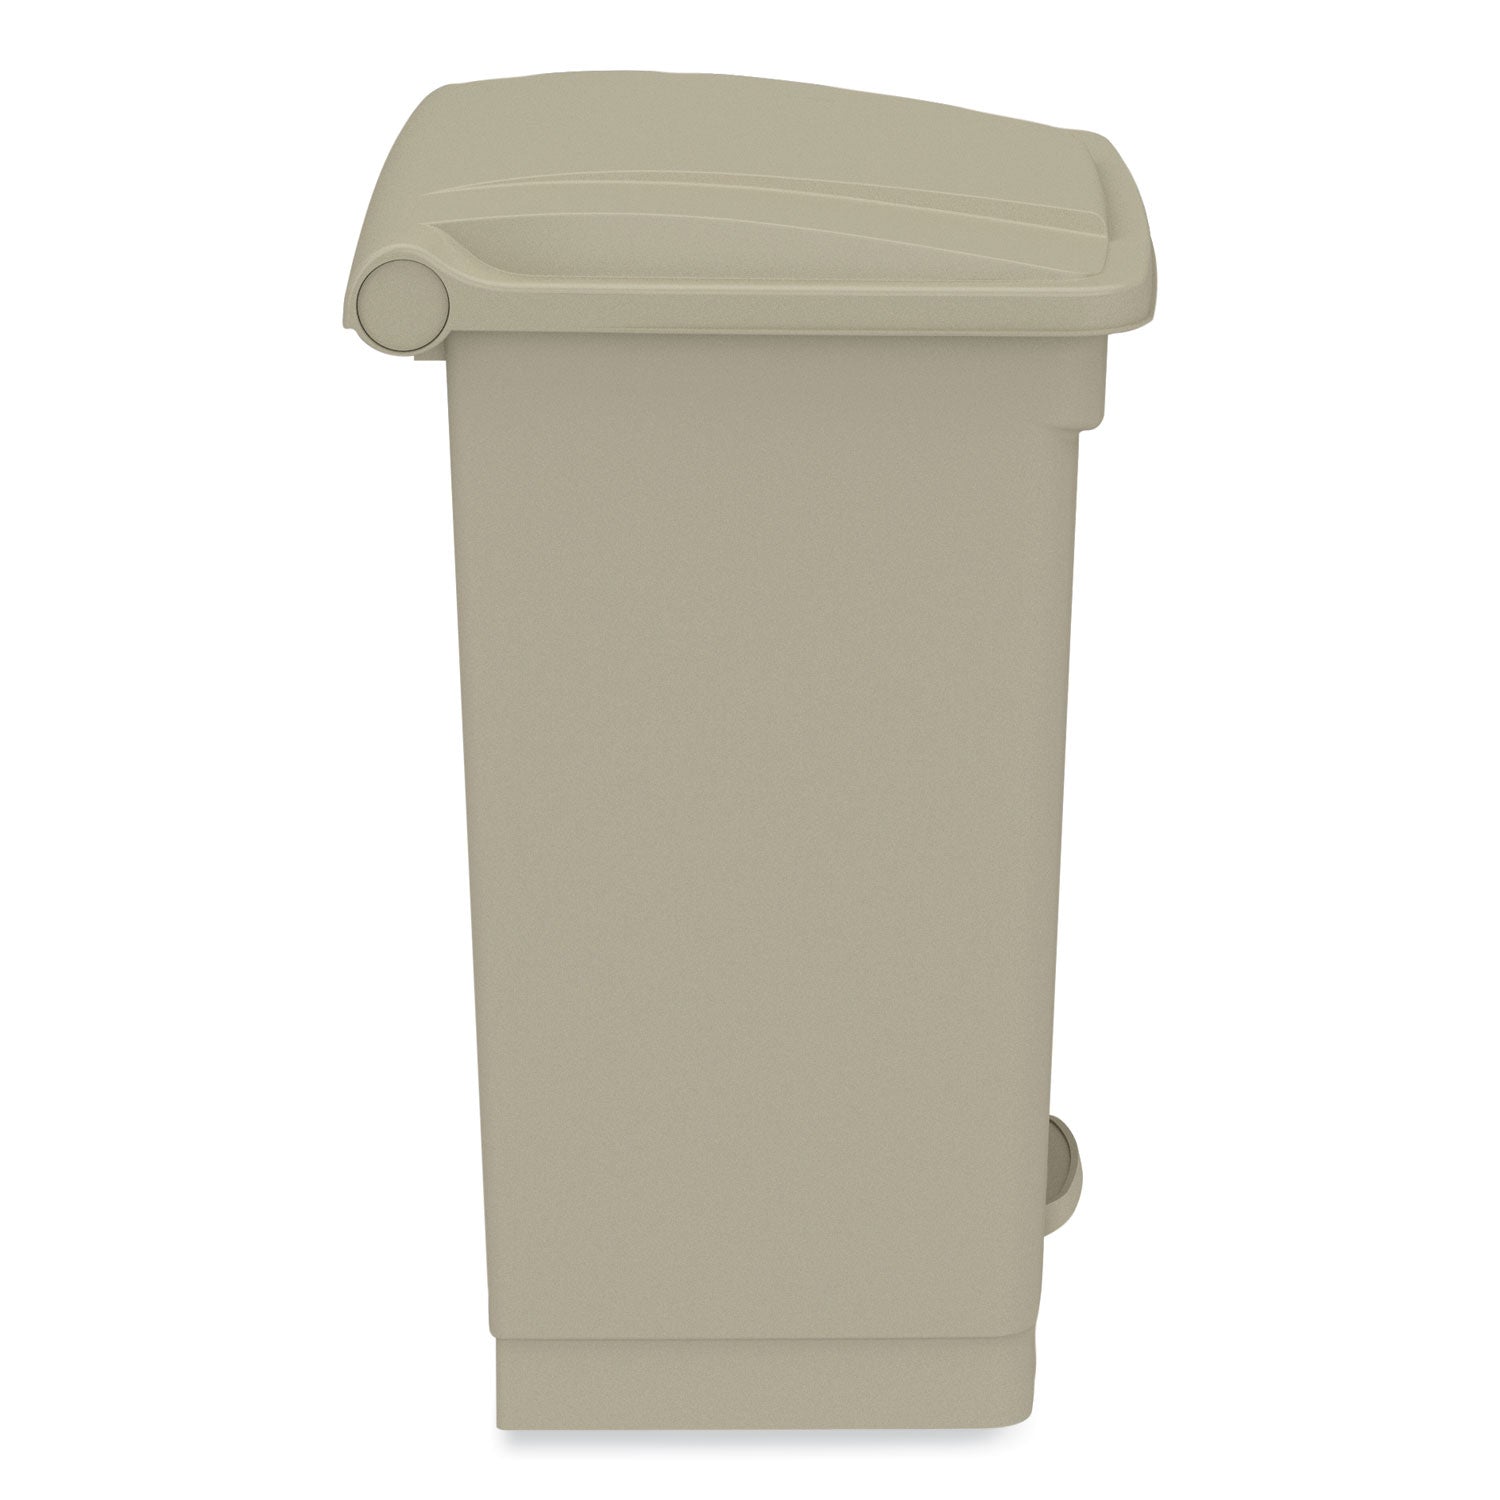 plastic-step-on-receptacle-12-gal-plastic-tan-ships-in-1-3-business-days_saf9925tn - 2